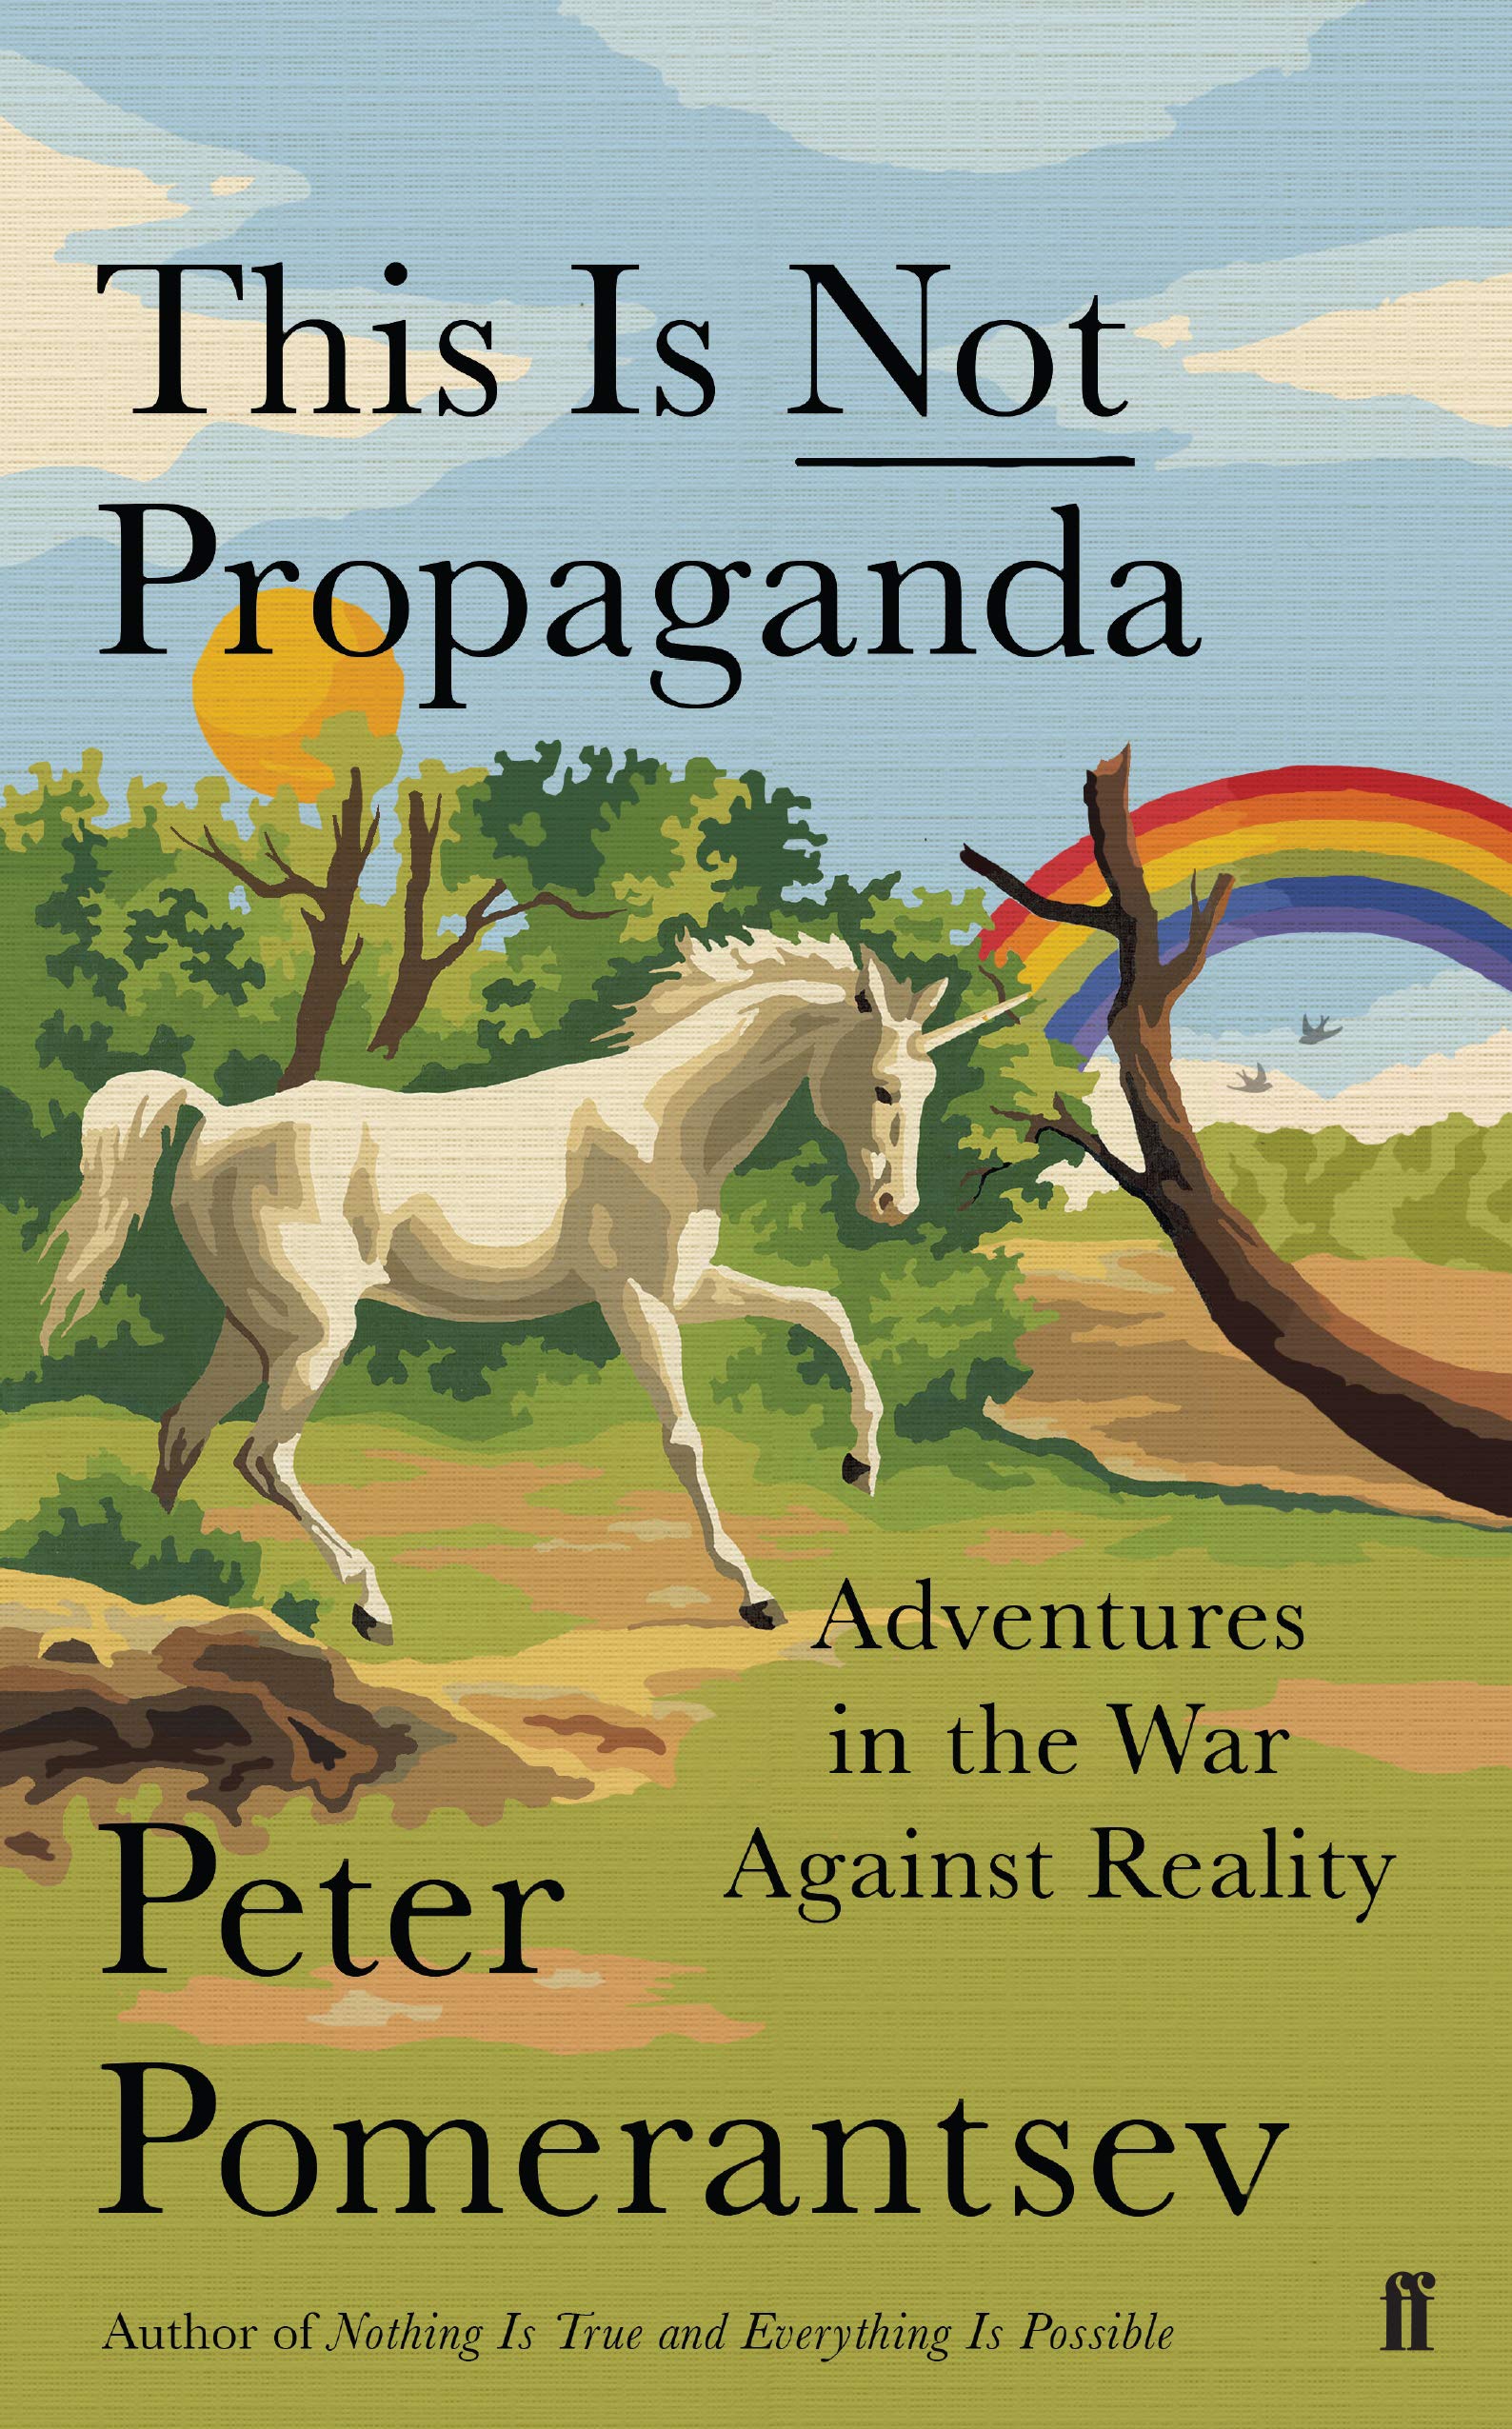 This is Not Propaganda: Adventures in the War Against Reality Book Release Date